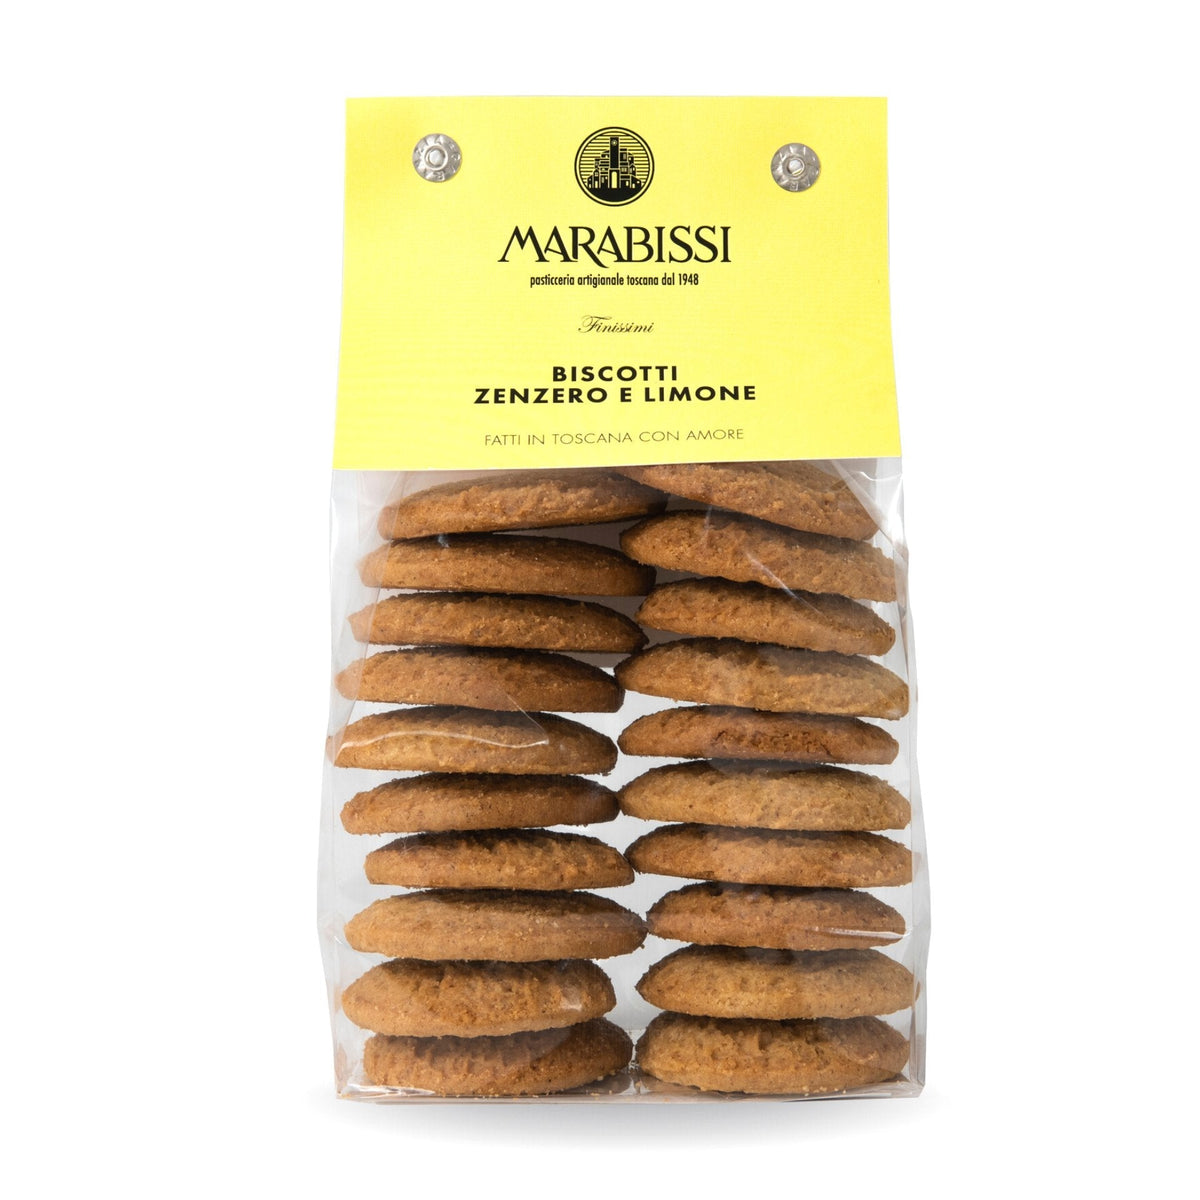 Marabissi Lemon &amp; Ginger Artisan Biscuits (Bag) 200g  | Imported and distributed in the UK by Just Gourmet Foods